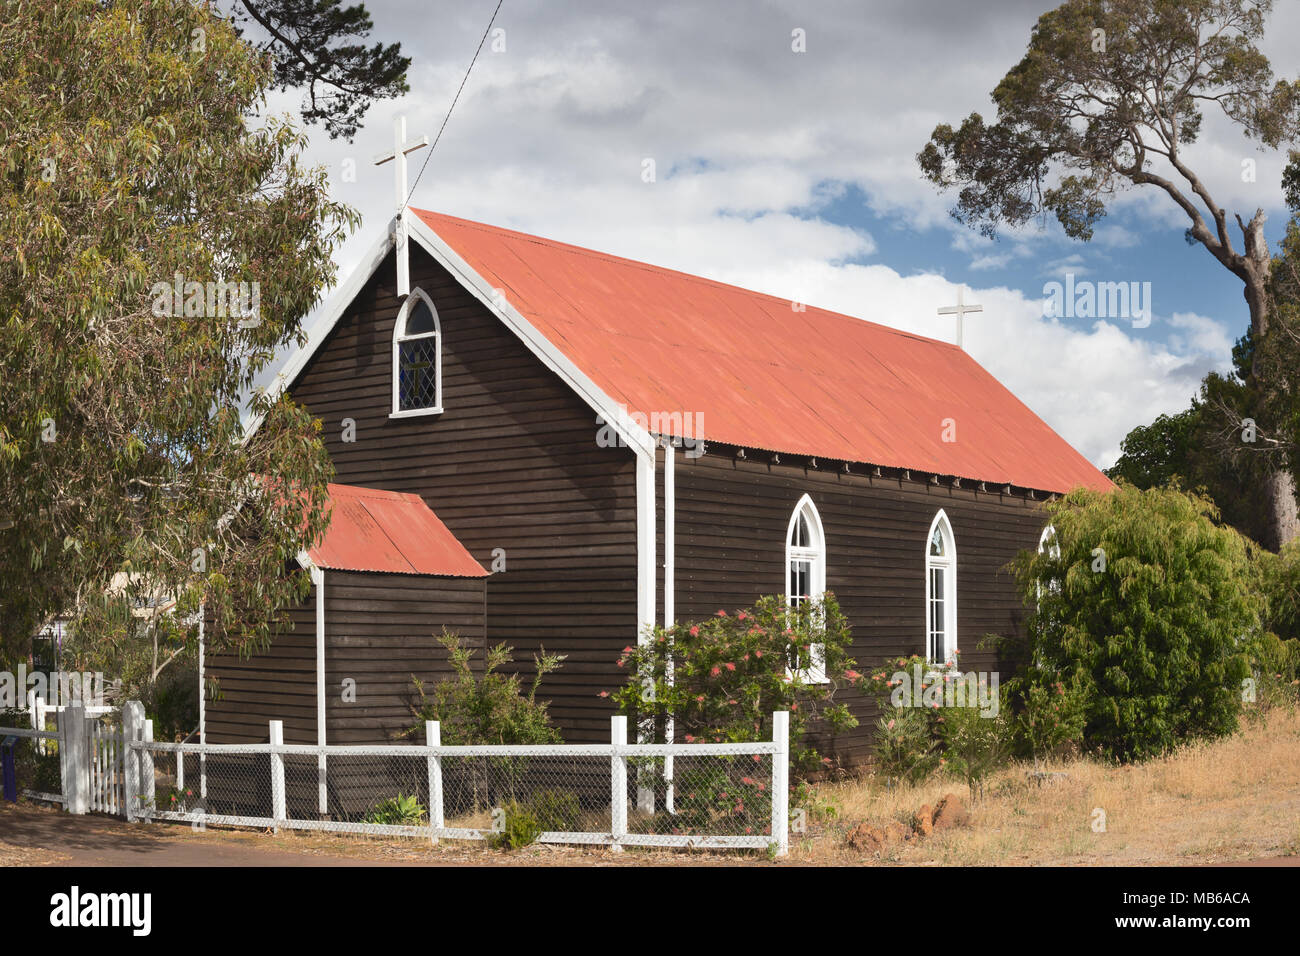 The Anglican Church of St Barnabas at Greenbushes in the south-west region of Western Australia Stock Photo